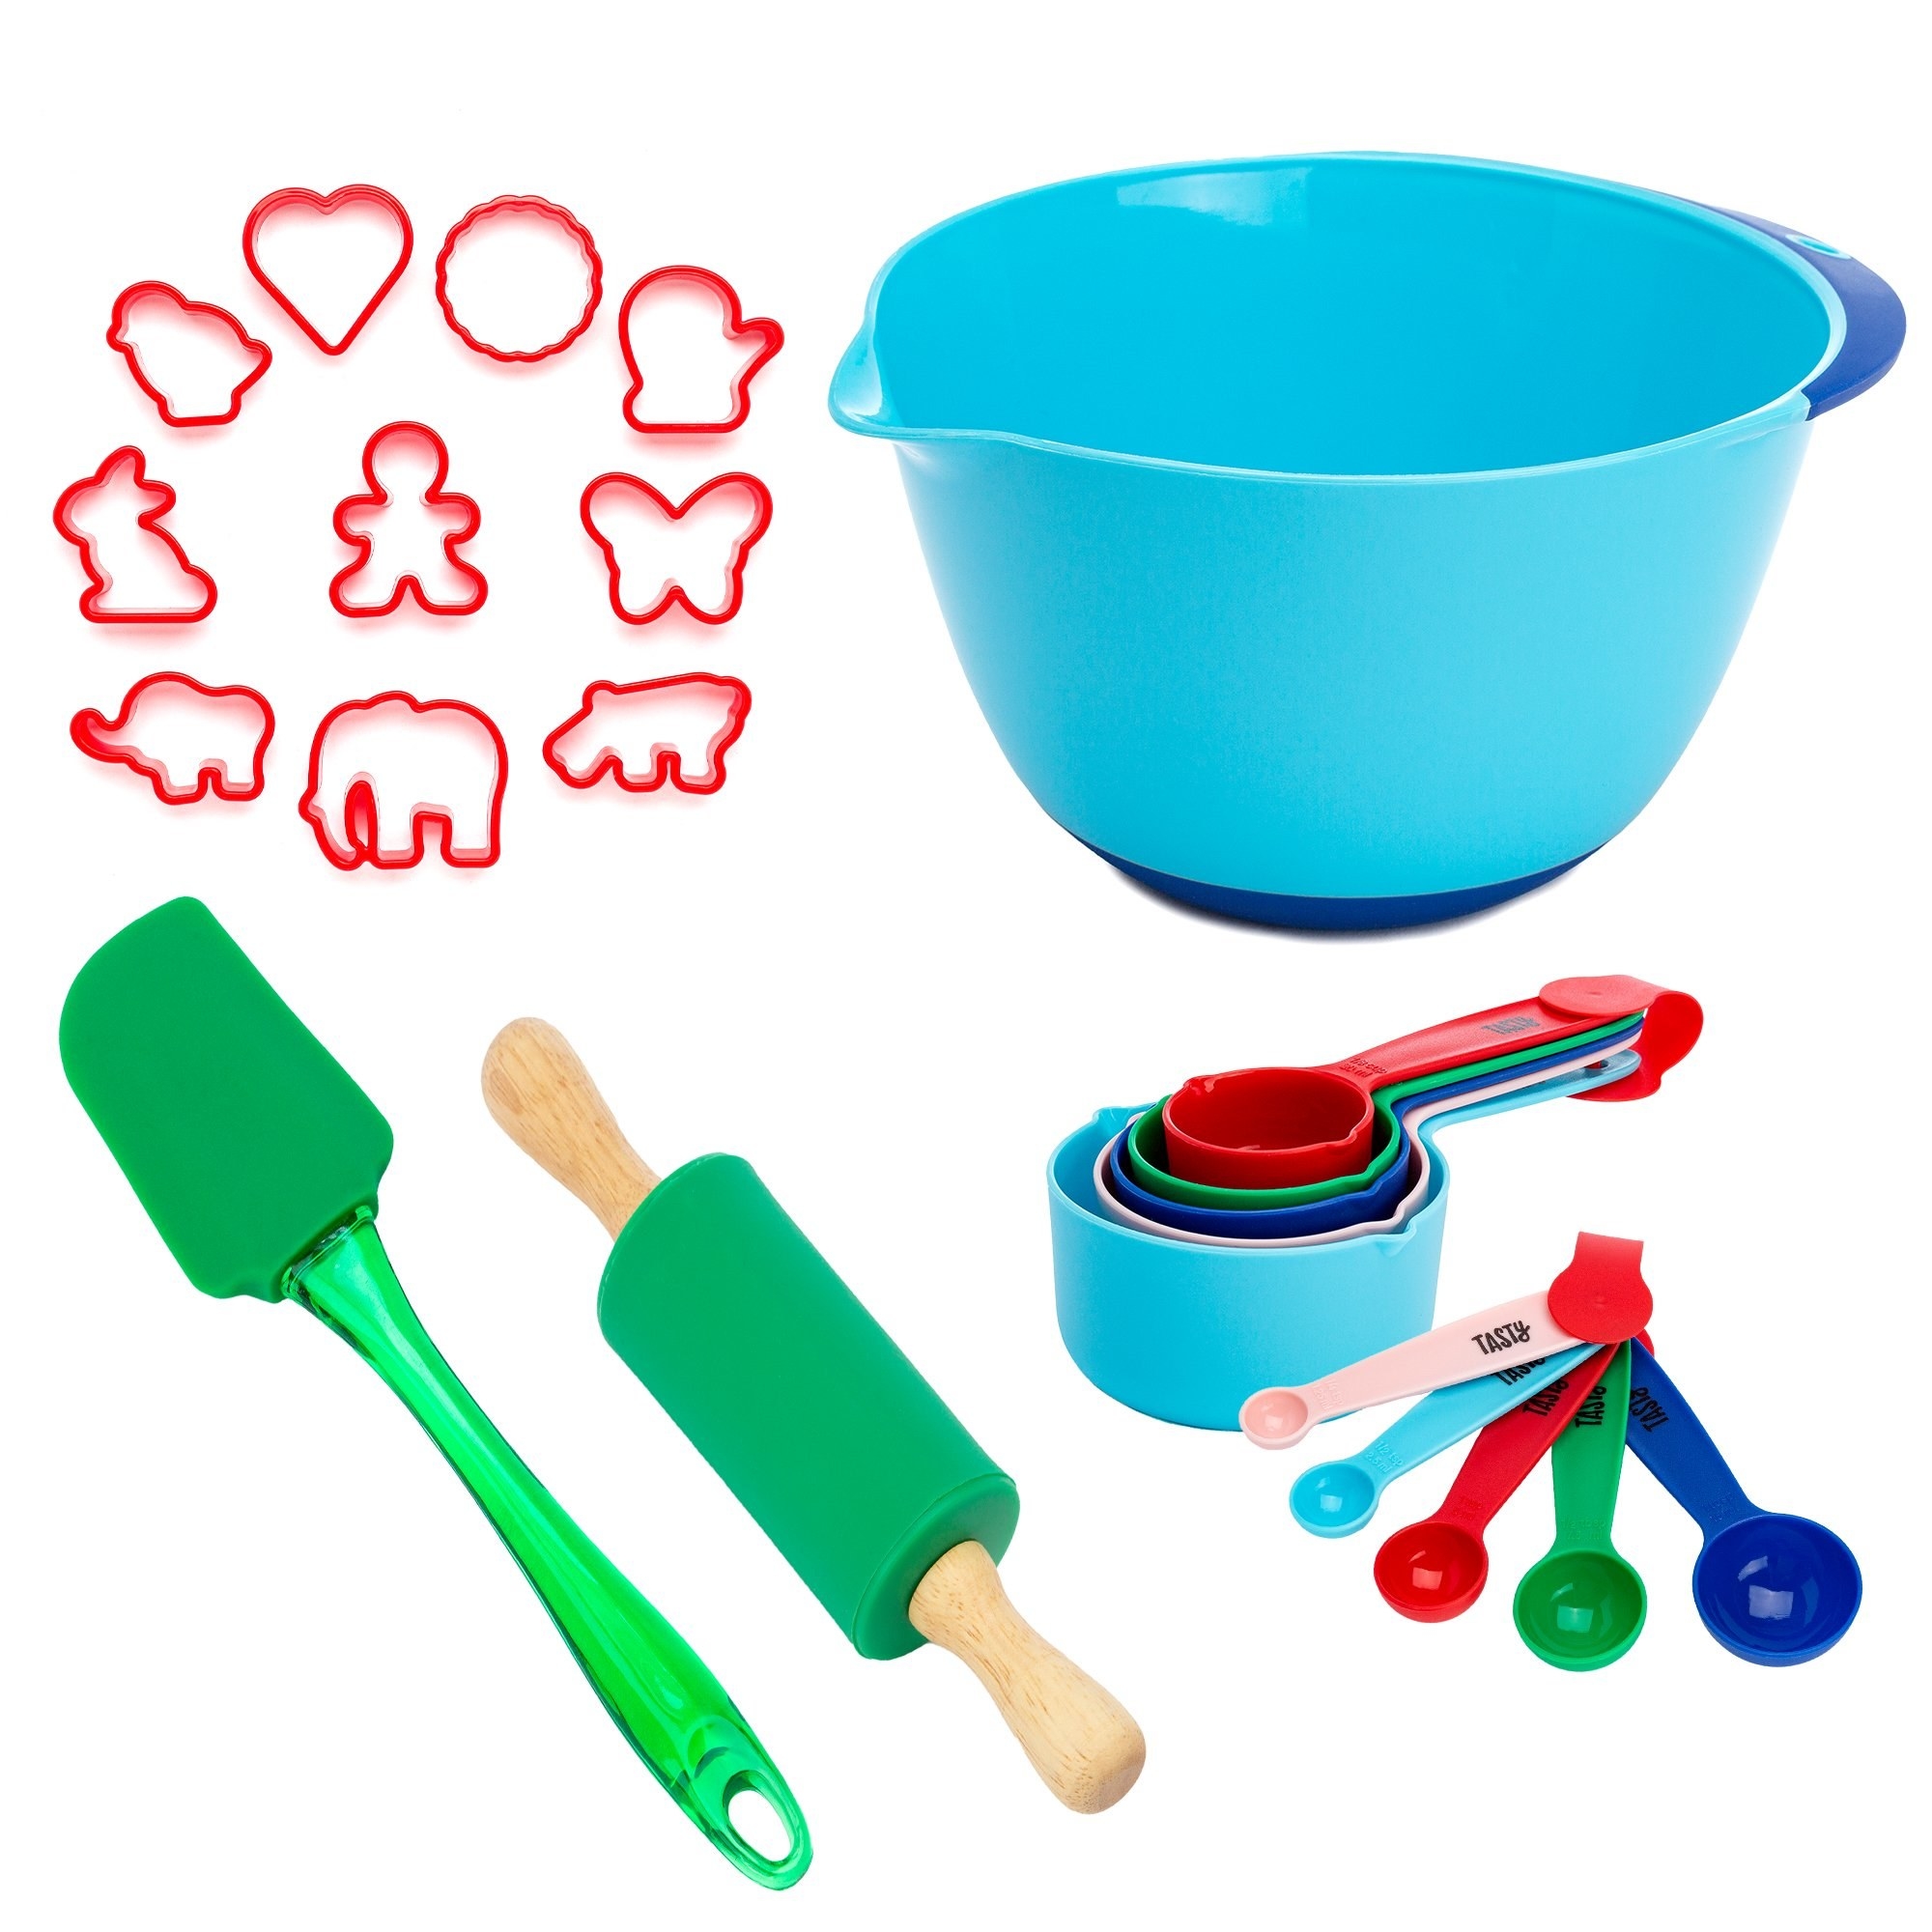 Different colored measuring cups, different colored measuring spoons, a green spatula, green silicone rolling pin with wooden handles, blue mixing bowl, and 10 differently shaped red cookie cutters